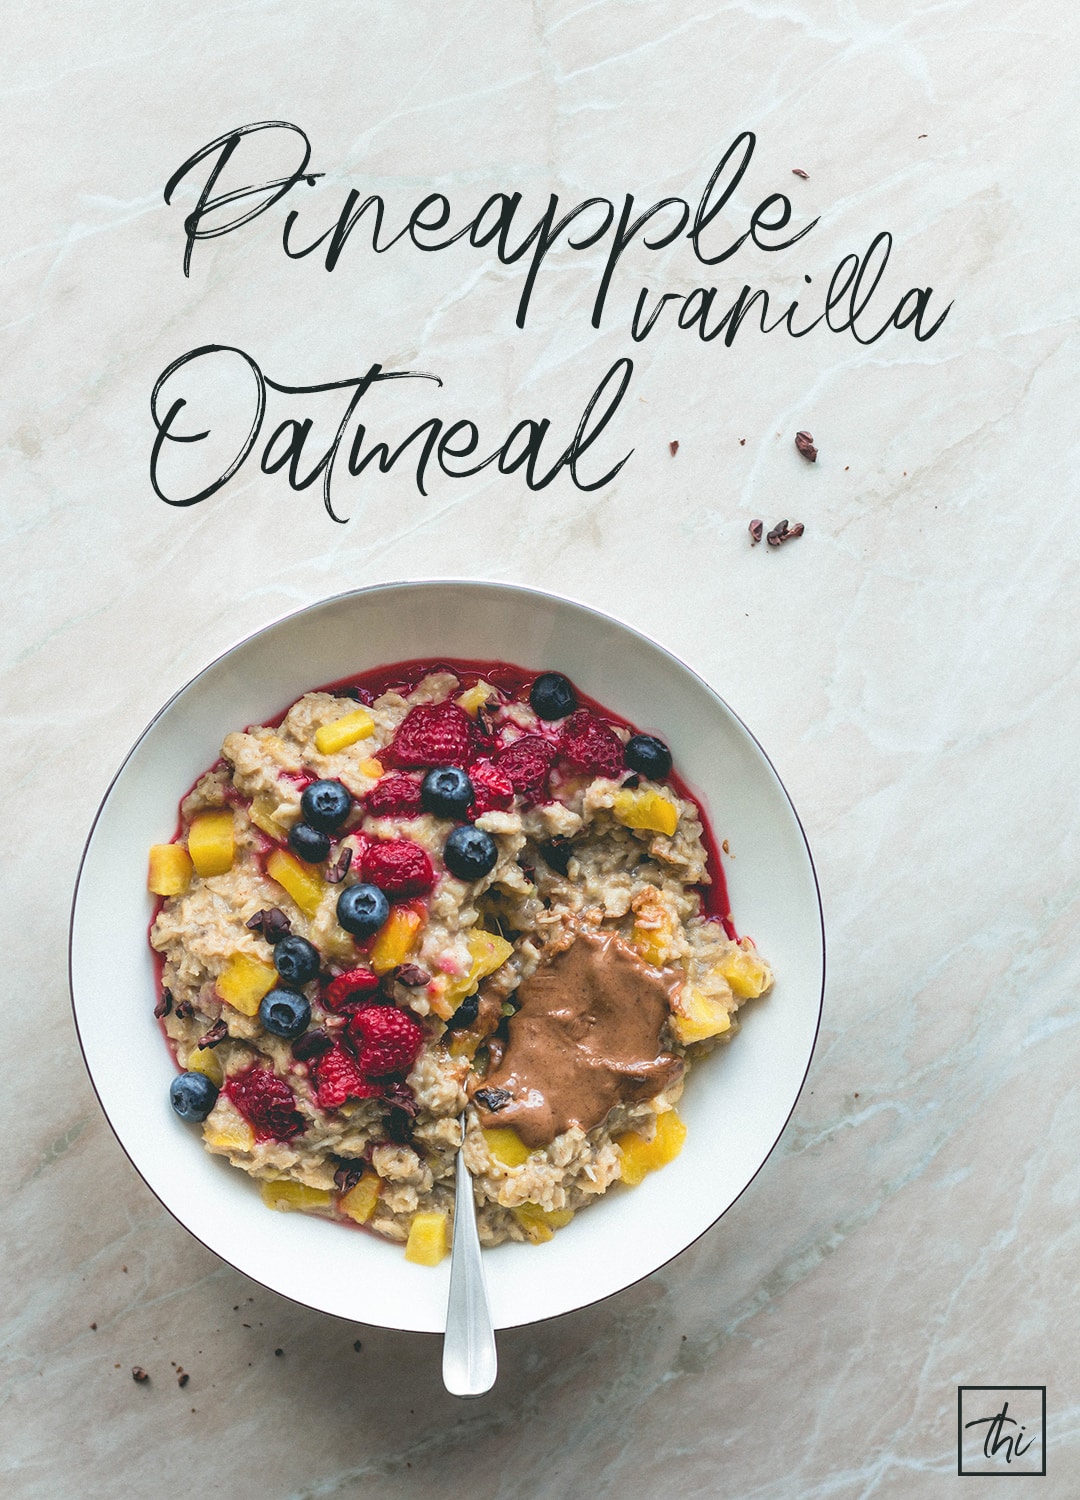 Pineapple Vanilla Oatmeal (vegan, gluten-free) - the most delicious breakfast! This pina colada oatmeal is really easy to make and super delicious! Pineapple, oats, almond milk, and vanilla. You'll love this recipe! | thehealthfulideas.com